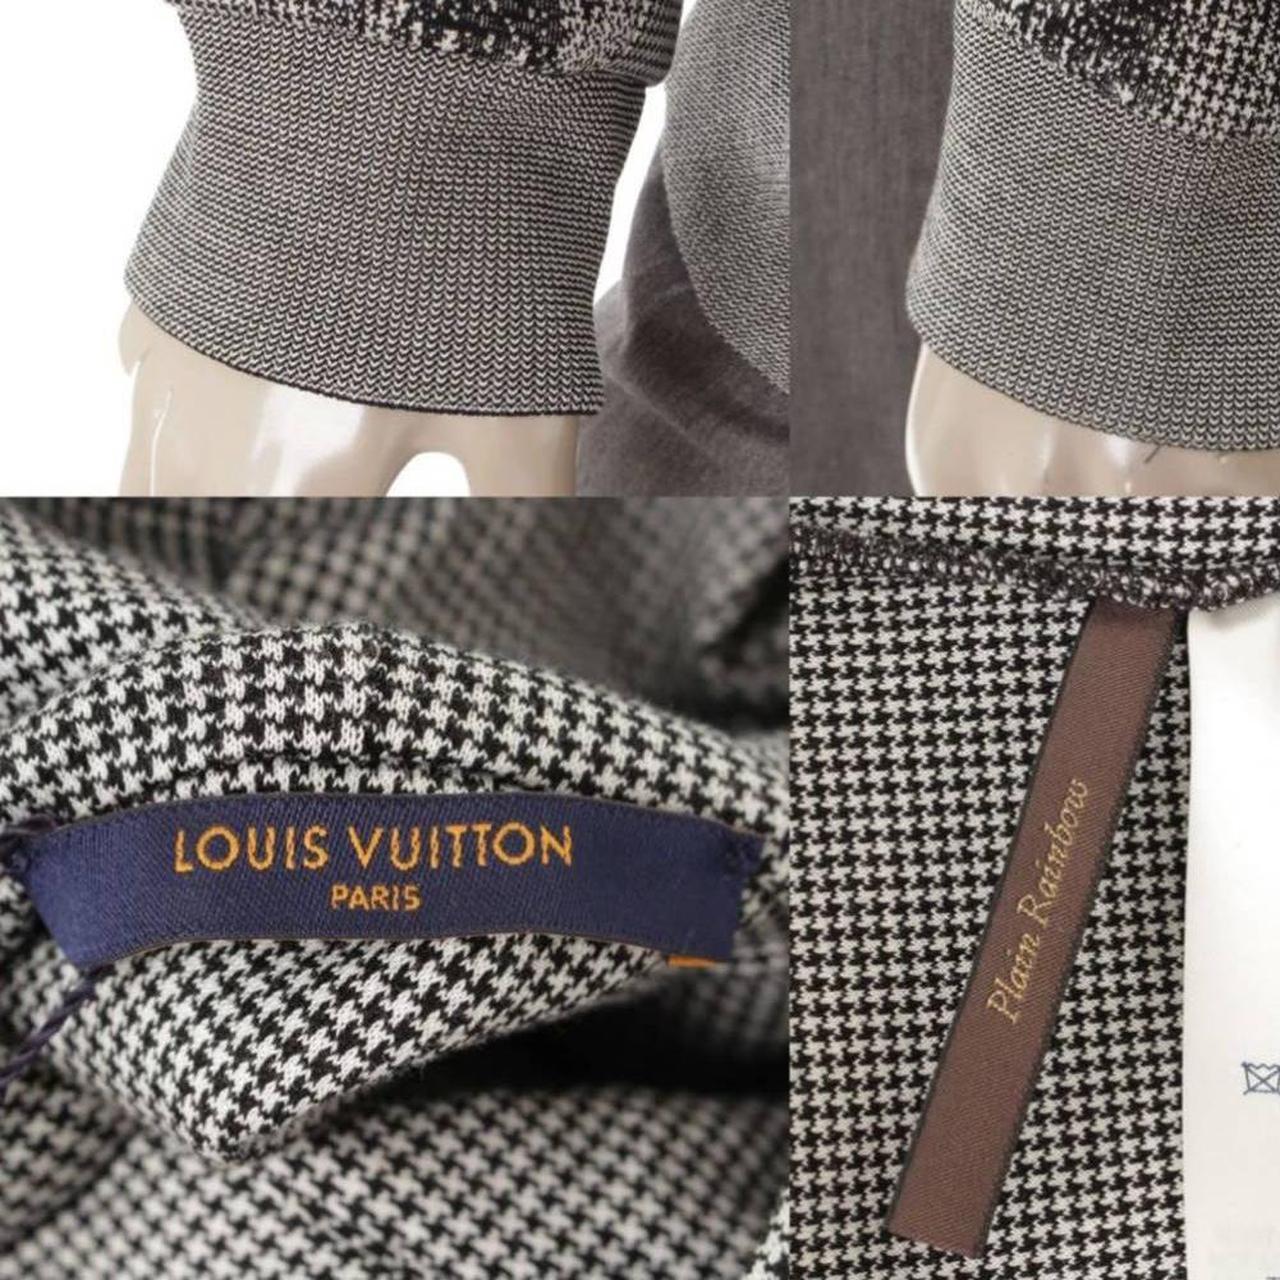 Louis Vuitton 2019 Wizard Of Oz Jacquard Pullover - Blue Sweaters